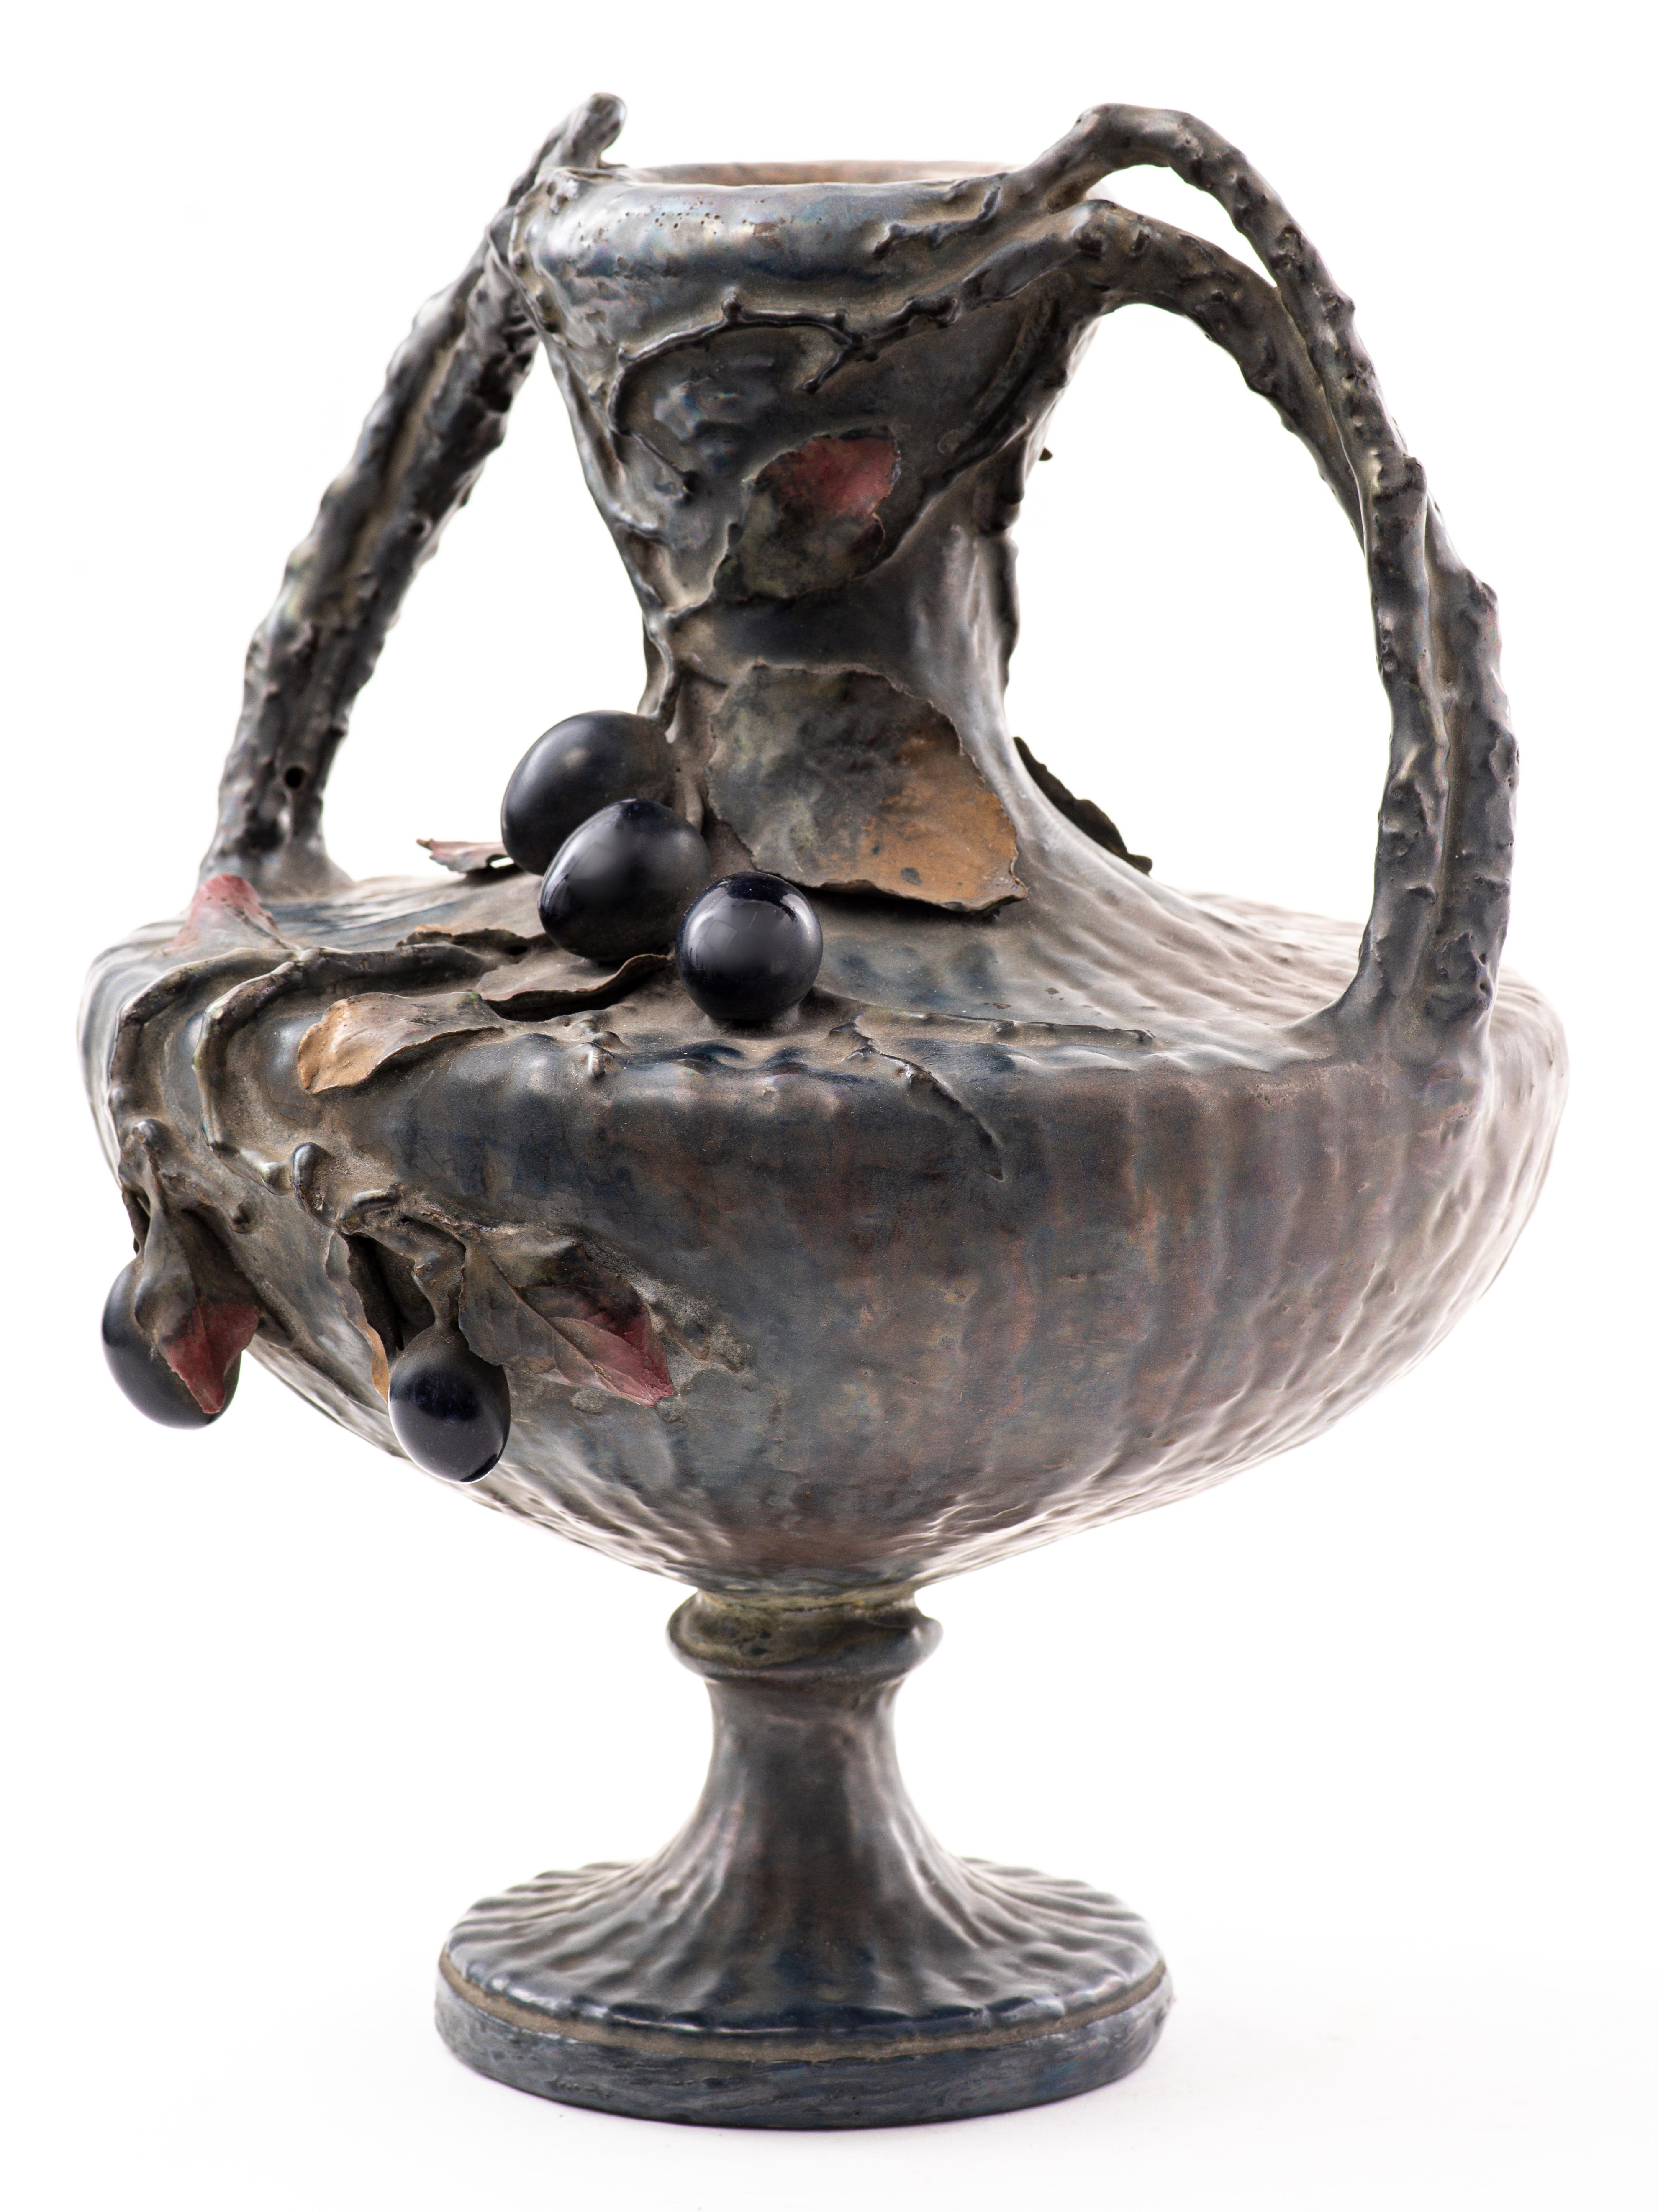 Amphora Austrian Art Nouveau semi-iridescent ceramic two-handled vase decorated with hanging grape cluster and vines and leaves. Marked and numbered on bottom. Dimensions: 13.5